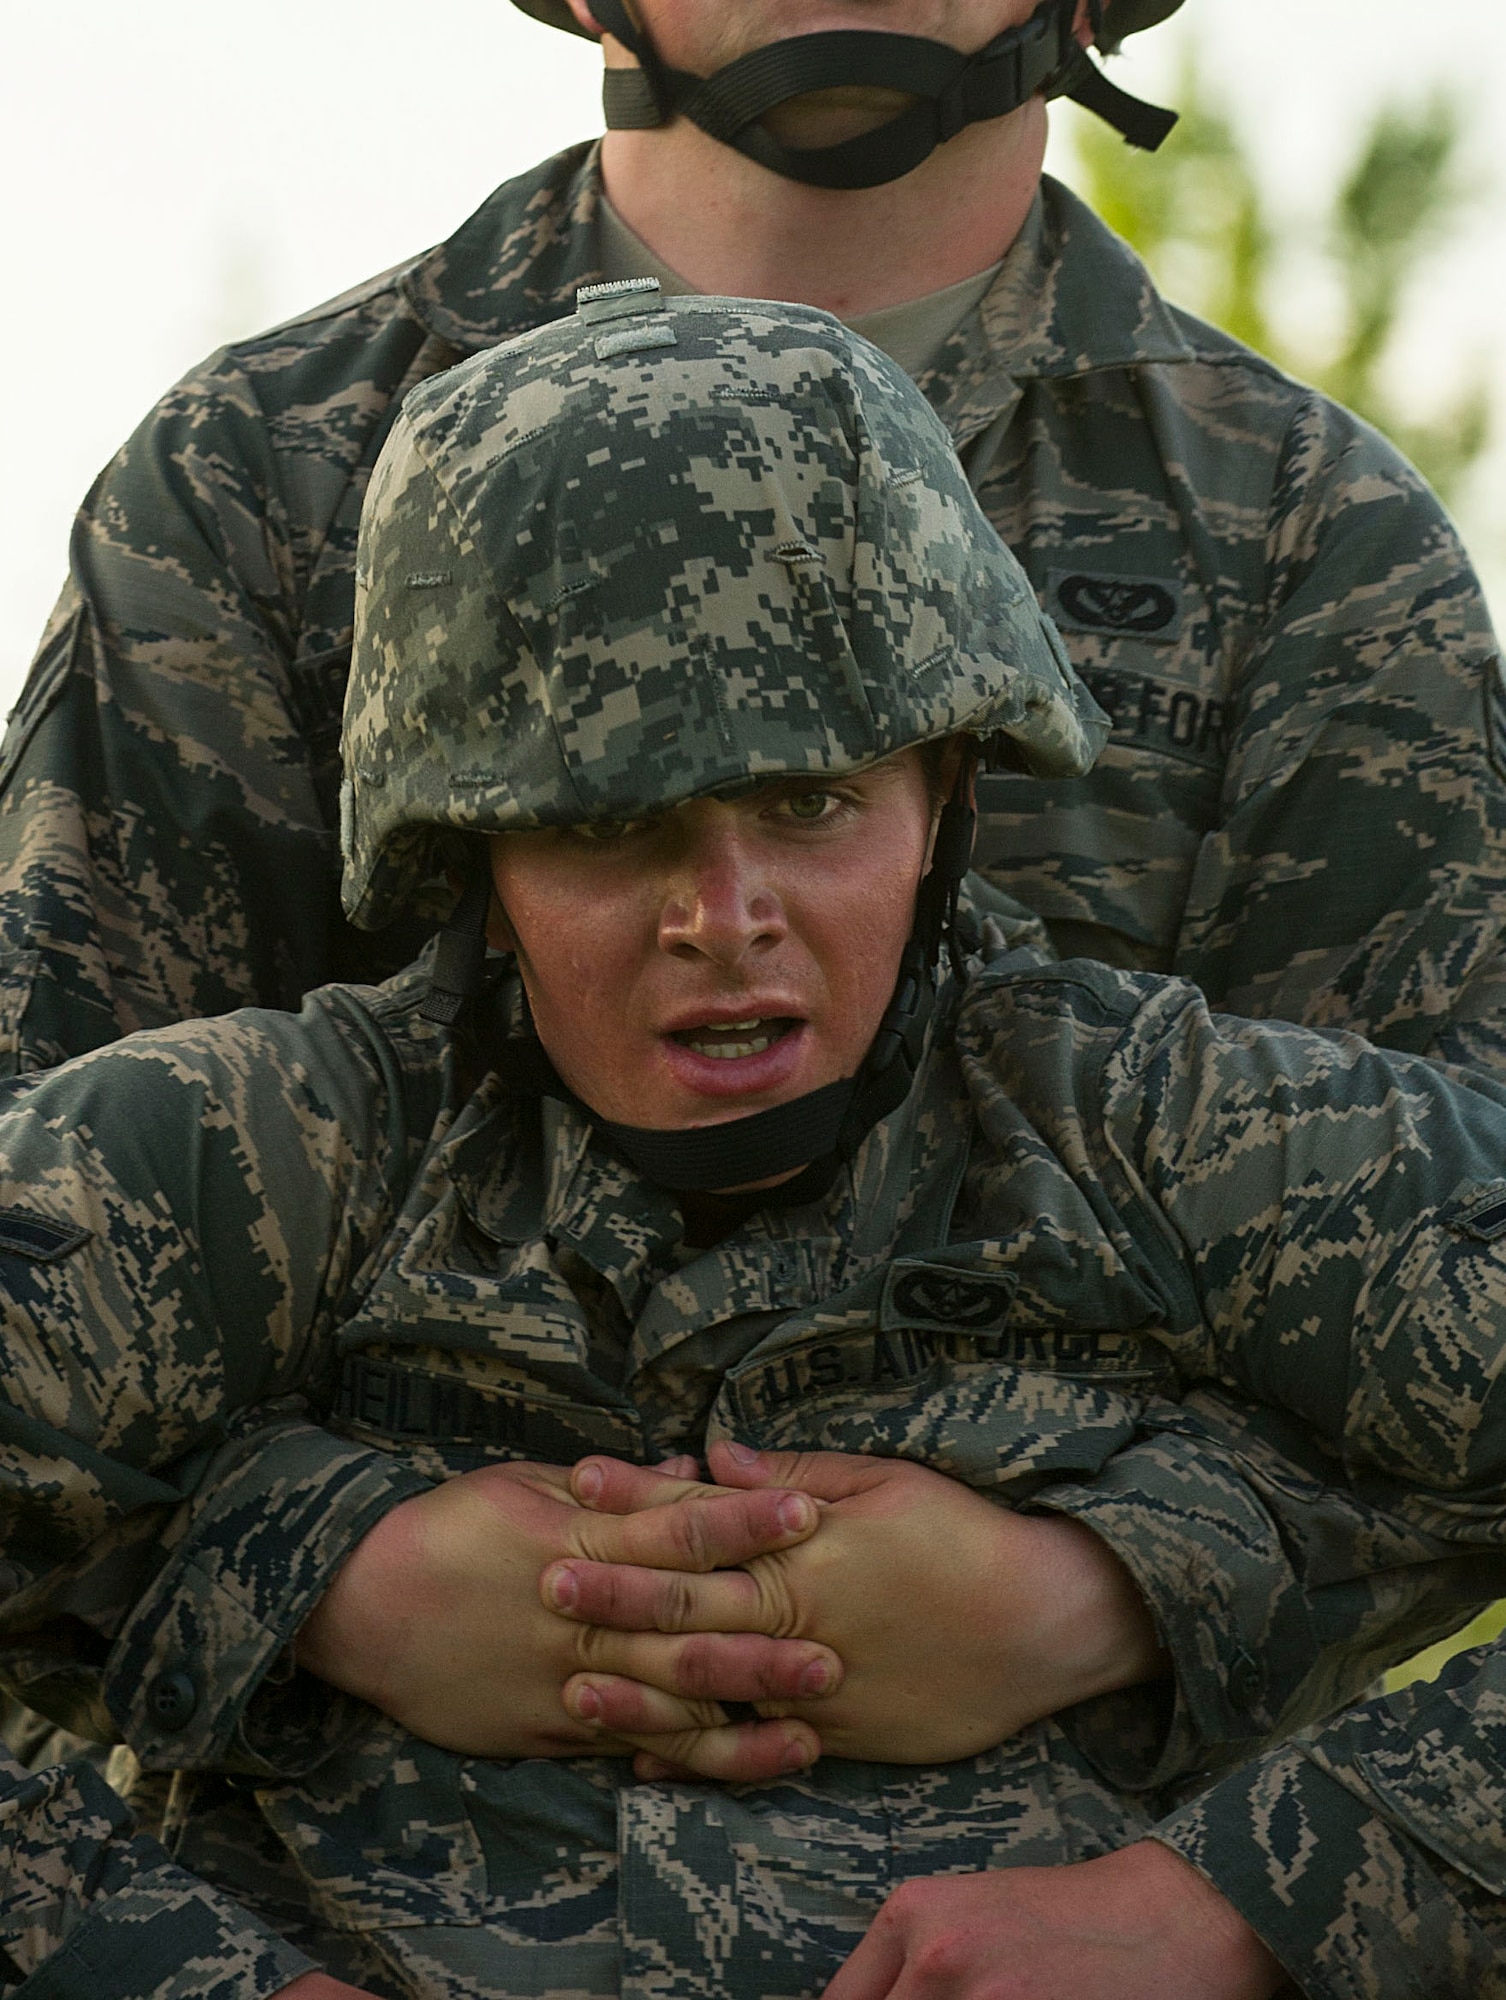 Airman Spencer Heilman, 5th Civil Engineer Squadron structural apprentice, is dragged by an Airman during an Expeditionary Training Day at Minot Air Force Base, N.D., June 1, 2017. During this final task of the day-long event, Airmen practiced Self-Aid and Buddy Care techniques during a relay. (U.S. Air Force photo/Senior Airman Apryl Hall)